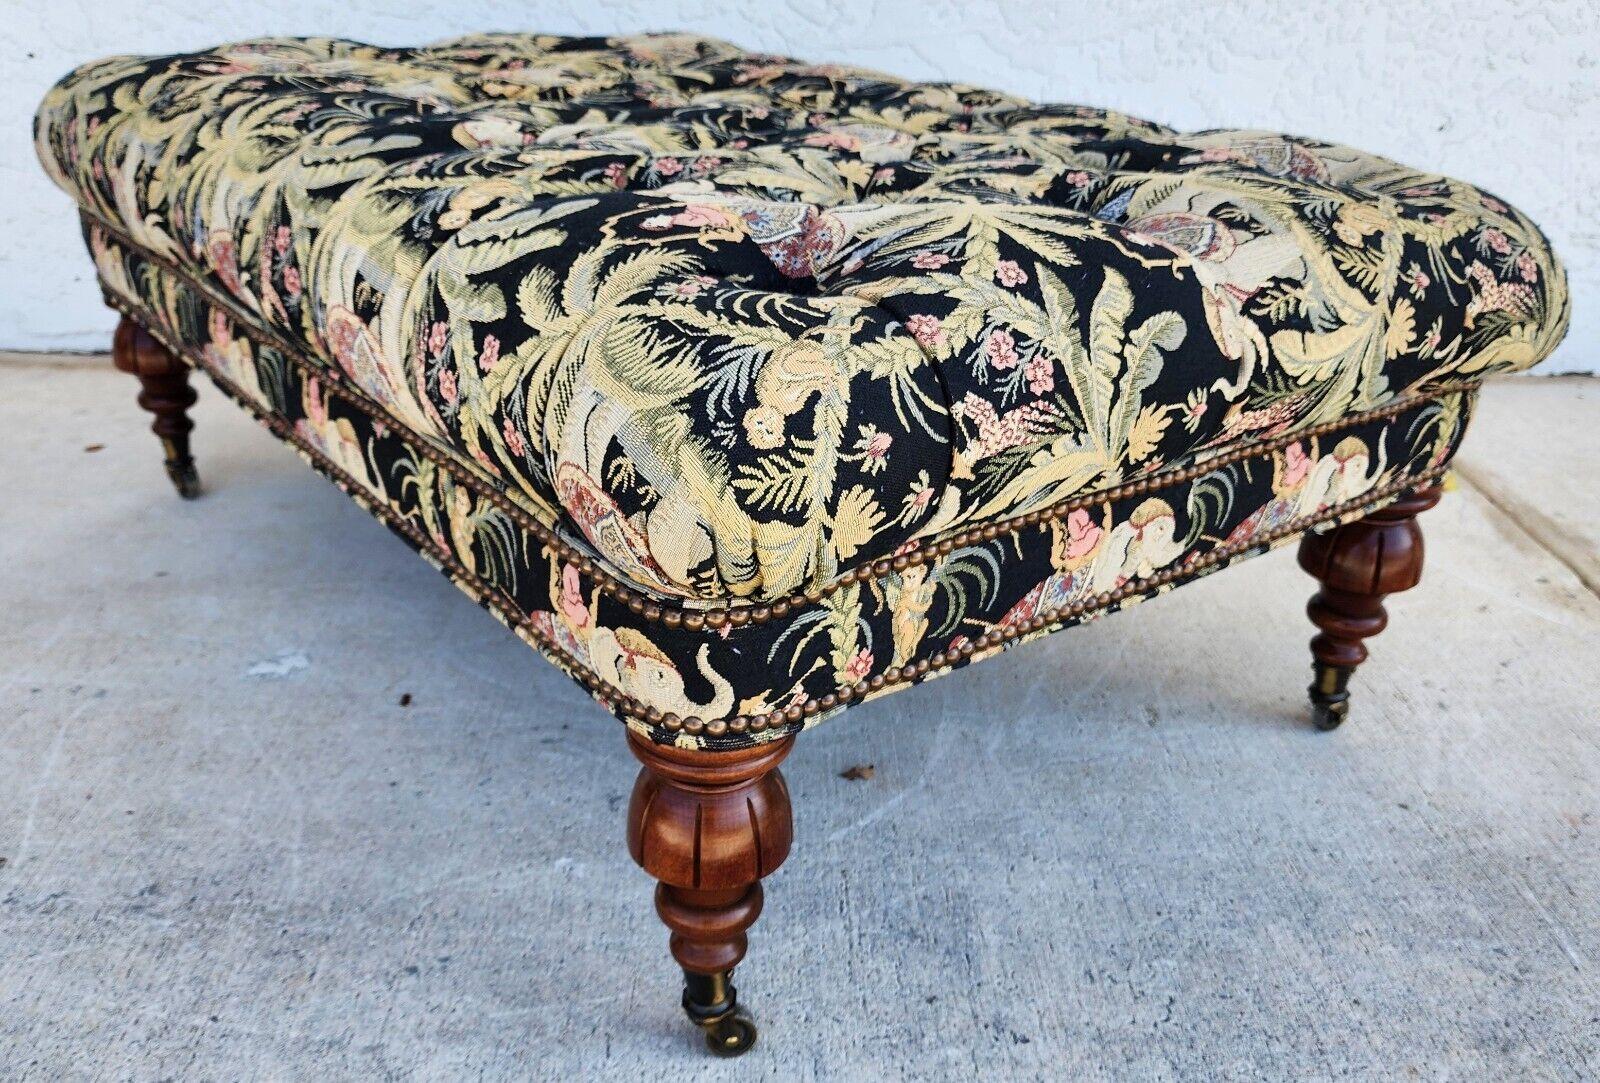 Mahogany Ottoman Coffee Table Oversized Tufted Rolling African Asian Elephants Monkeys For Sale